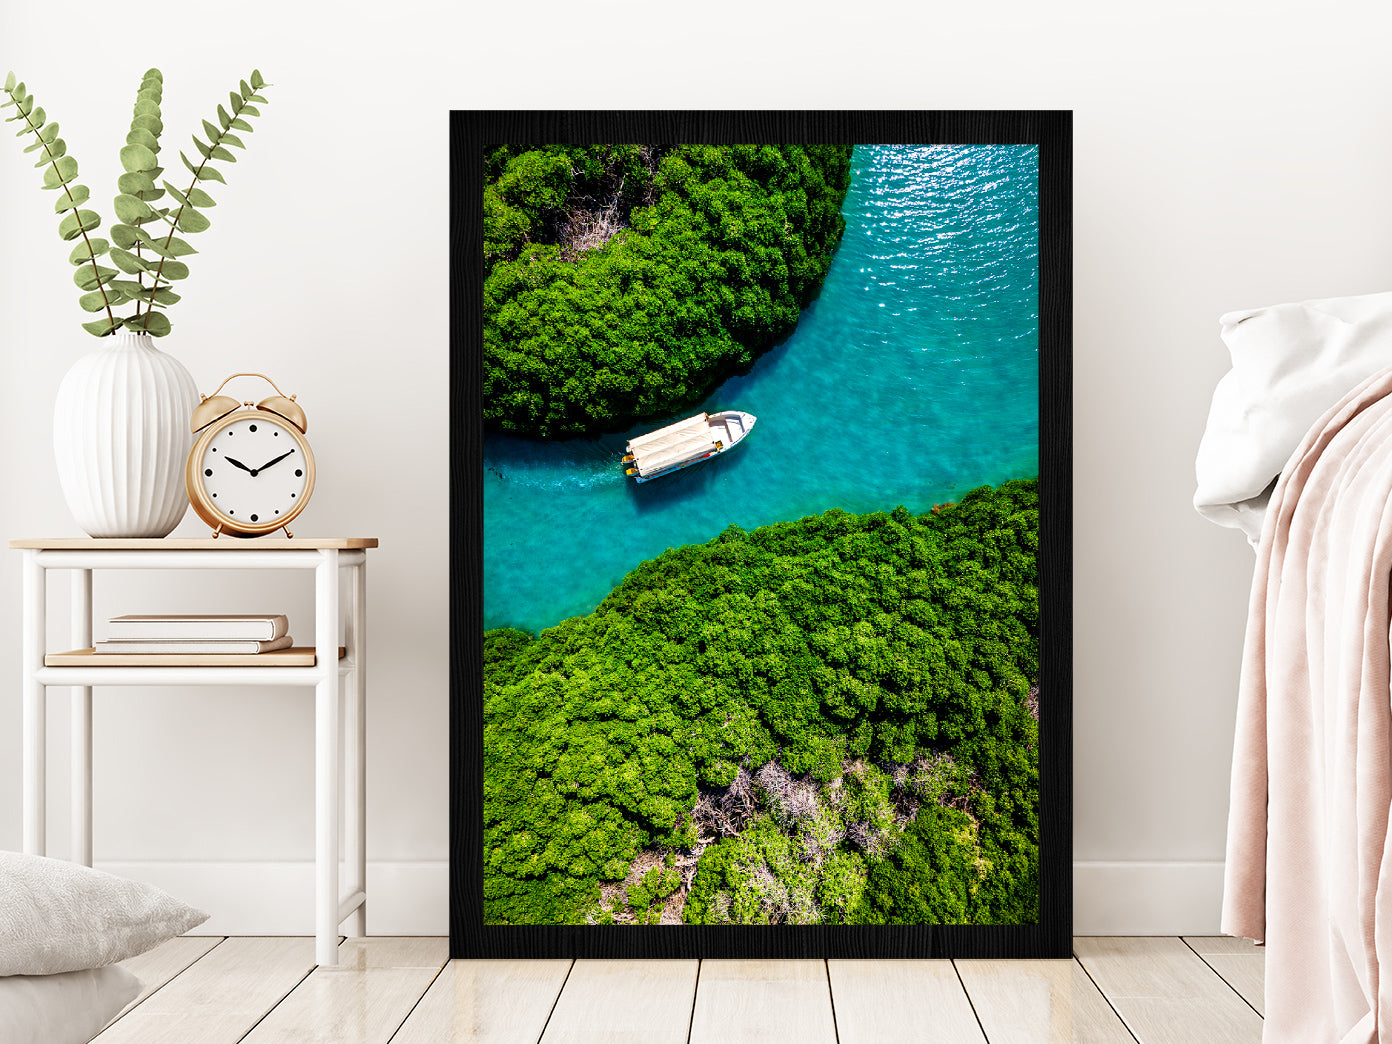 Mangrove Forest Farasan Island Glass Framed Wall Art, Ready to Hang Quality Print Without White Border Black